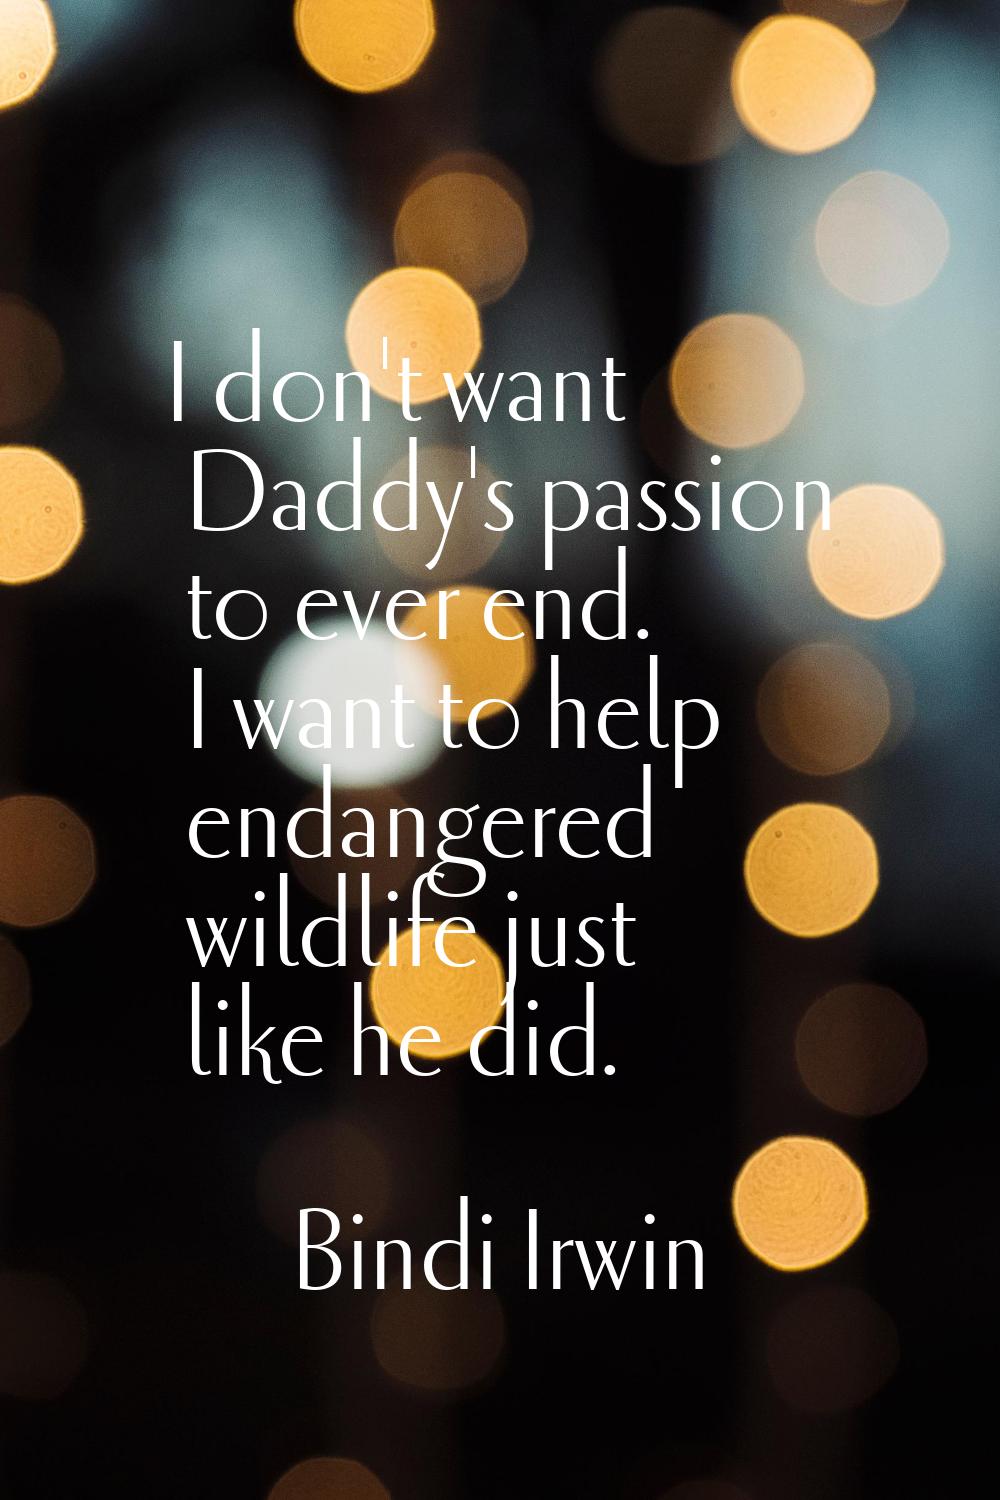 I don't want Daddy's passion to ever end. I want to help endangered wildlife just like he did.